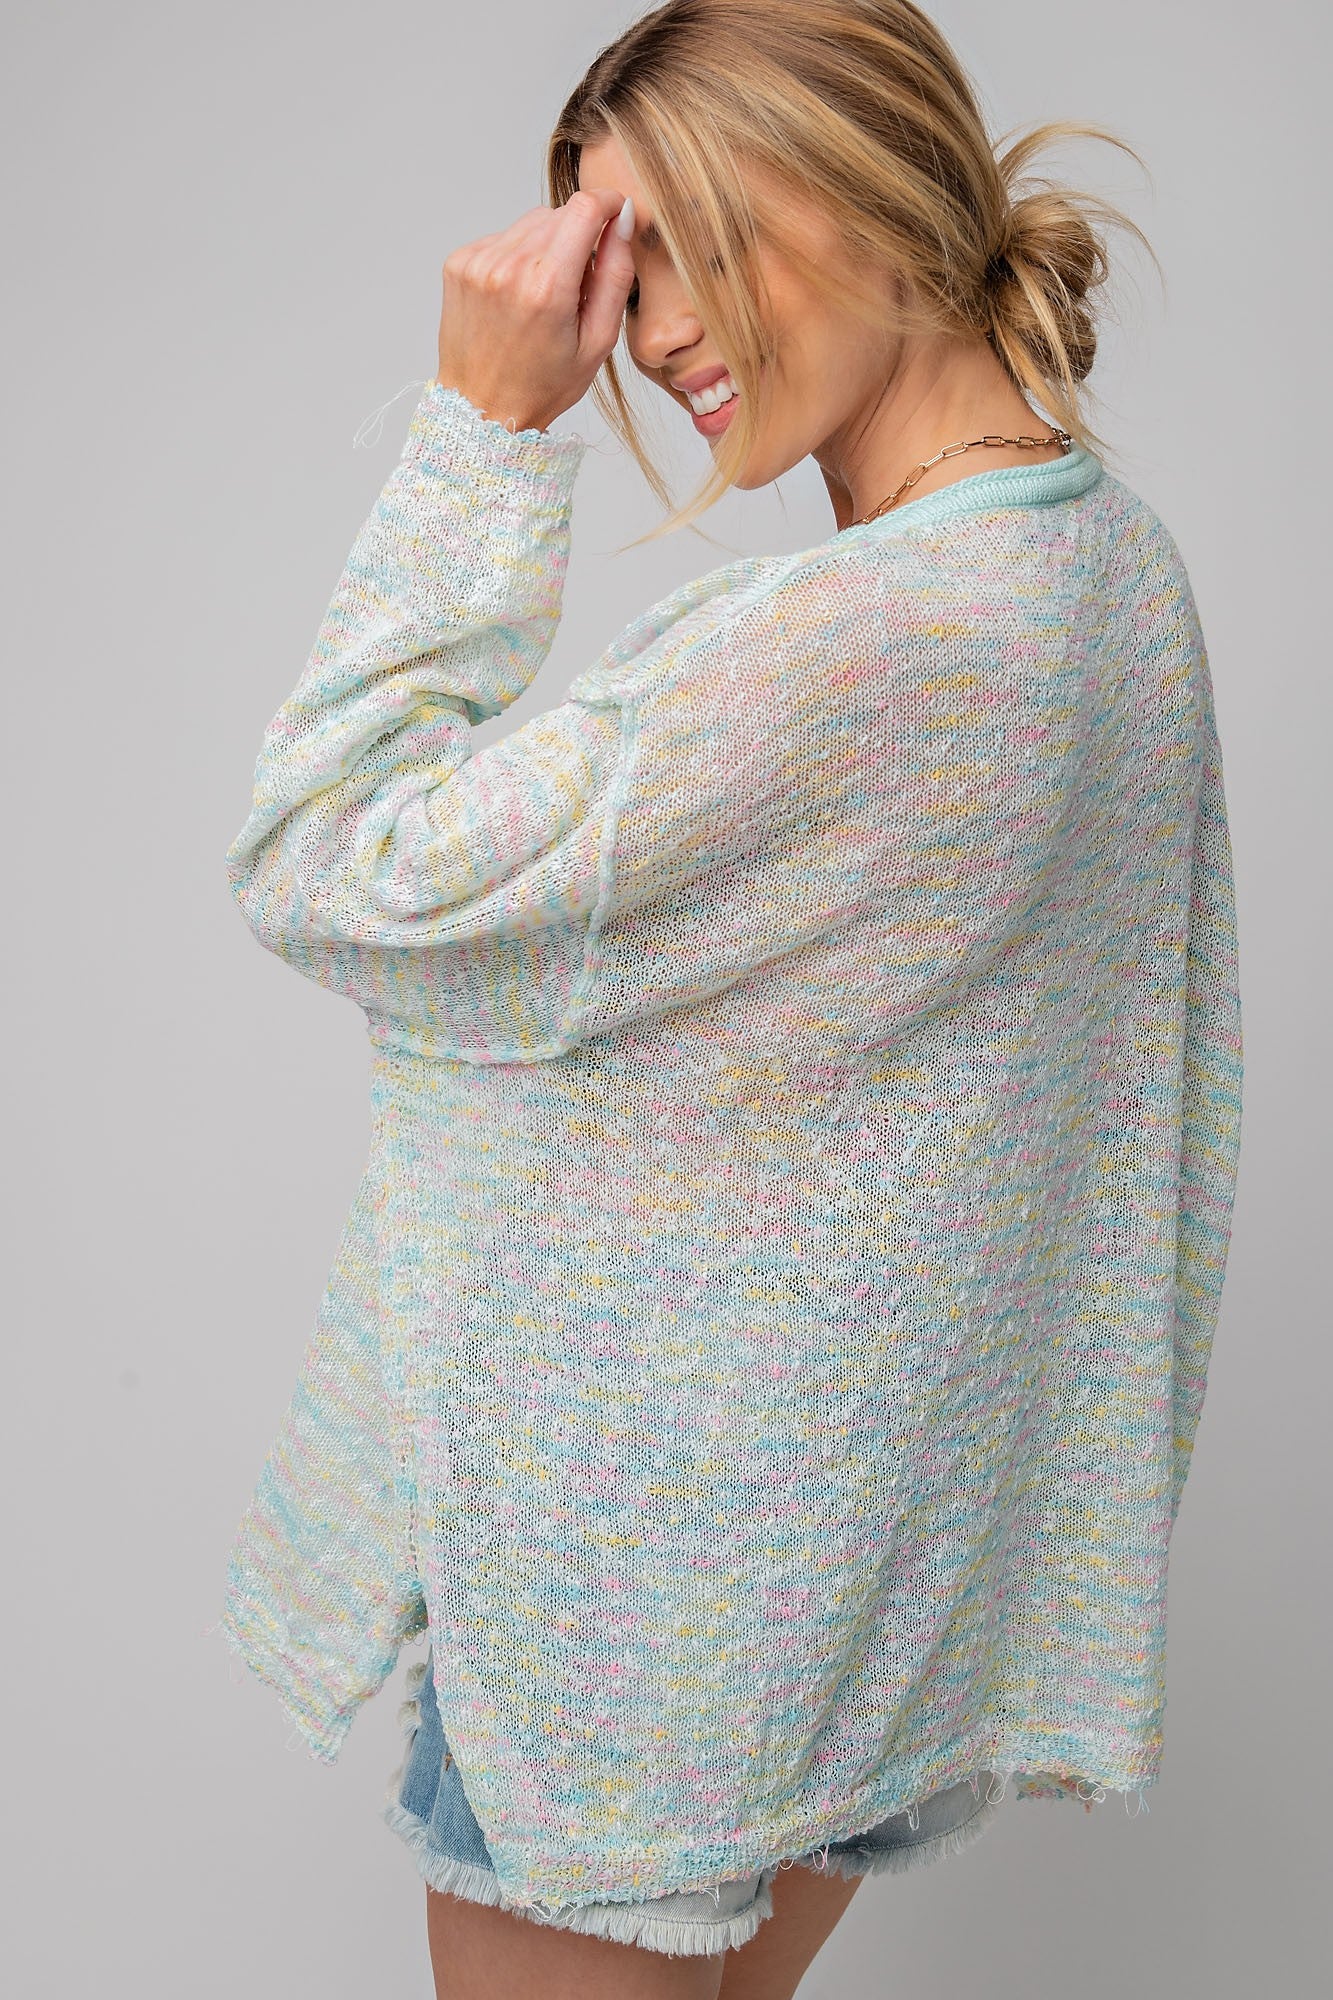 Easel Multi Color Light Weight Sweater in Mint